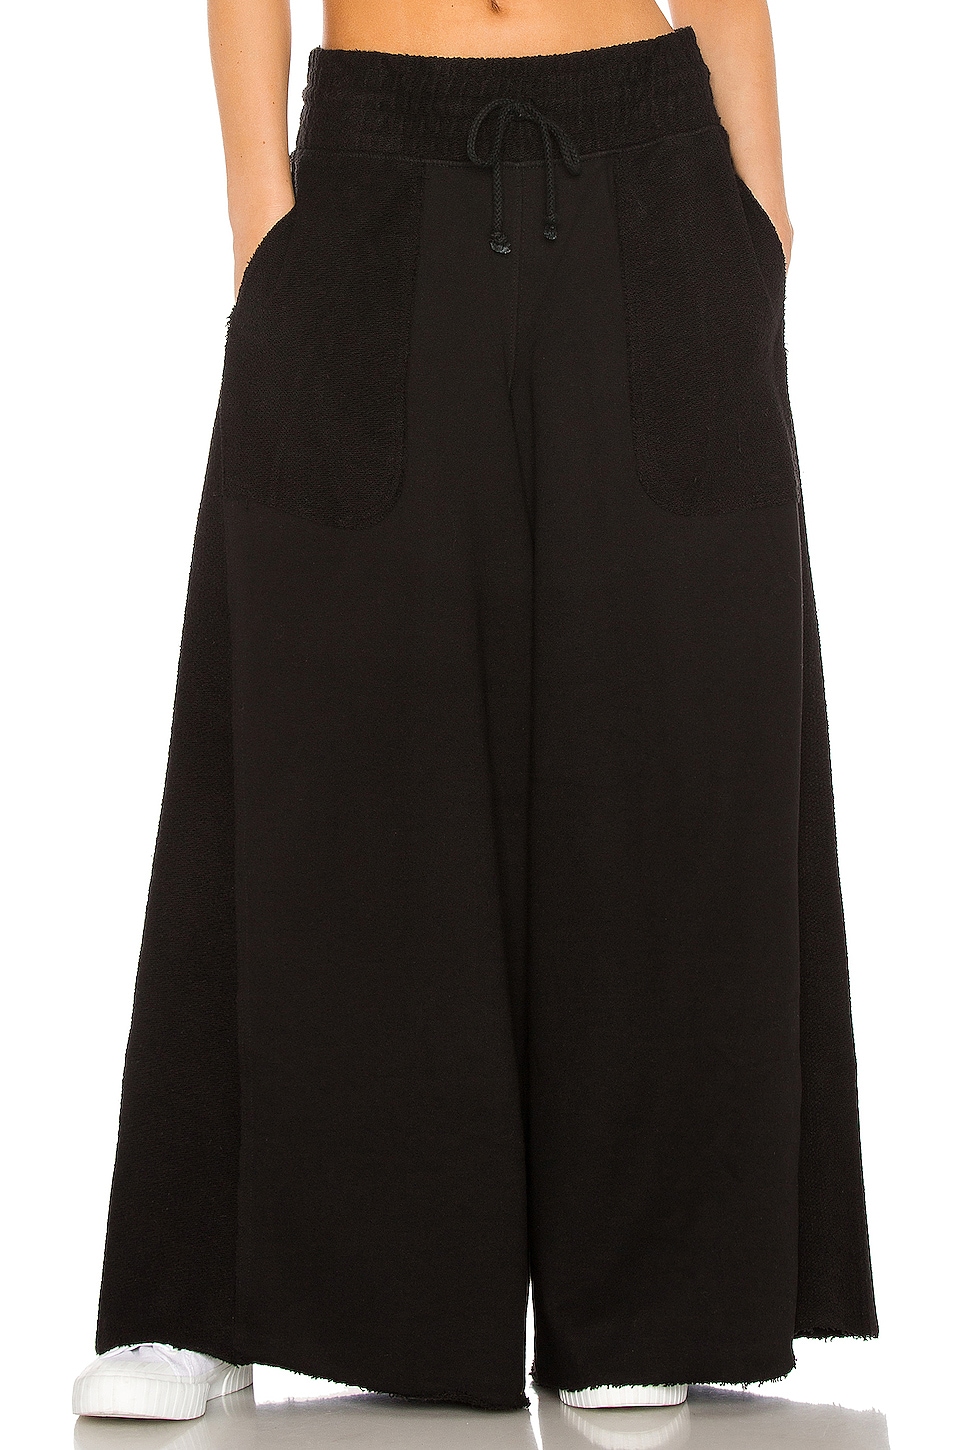 Free People X FP Movement Upbeat Wide Leg Pant in Black | REVOLVE